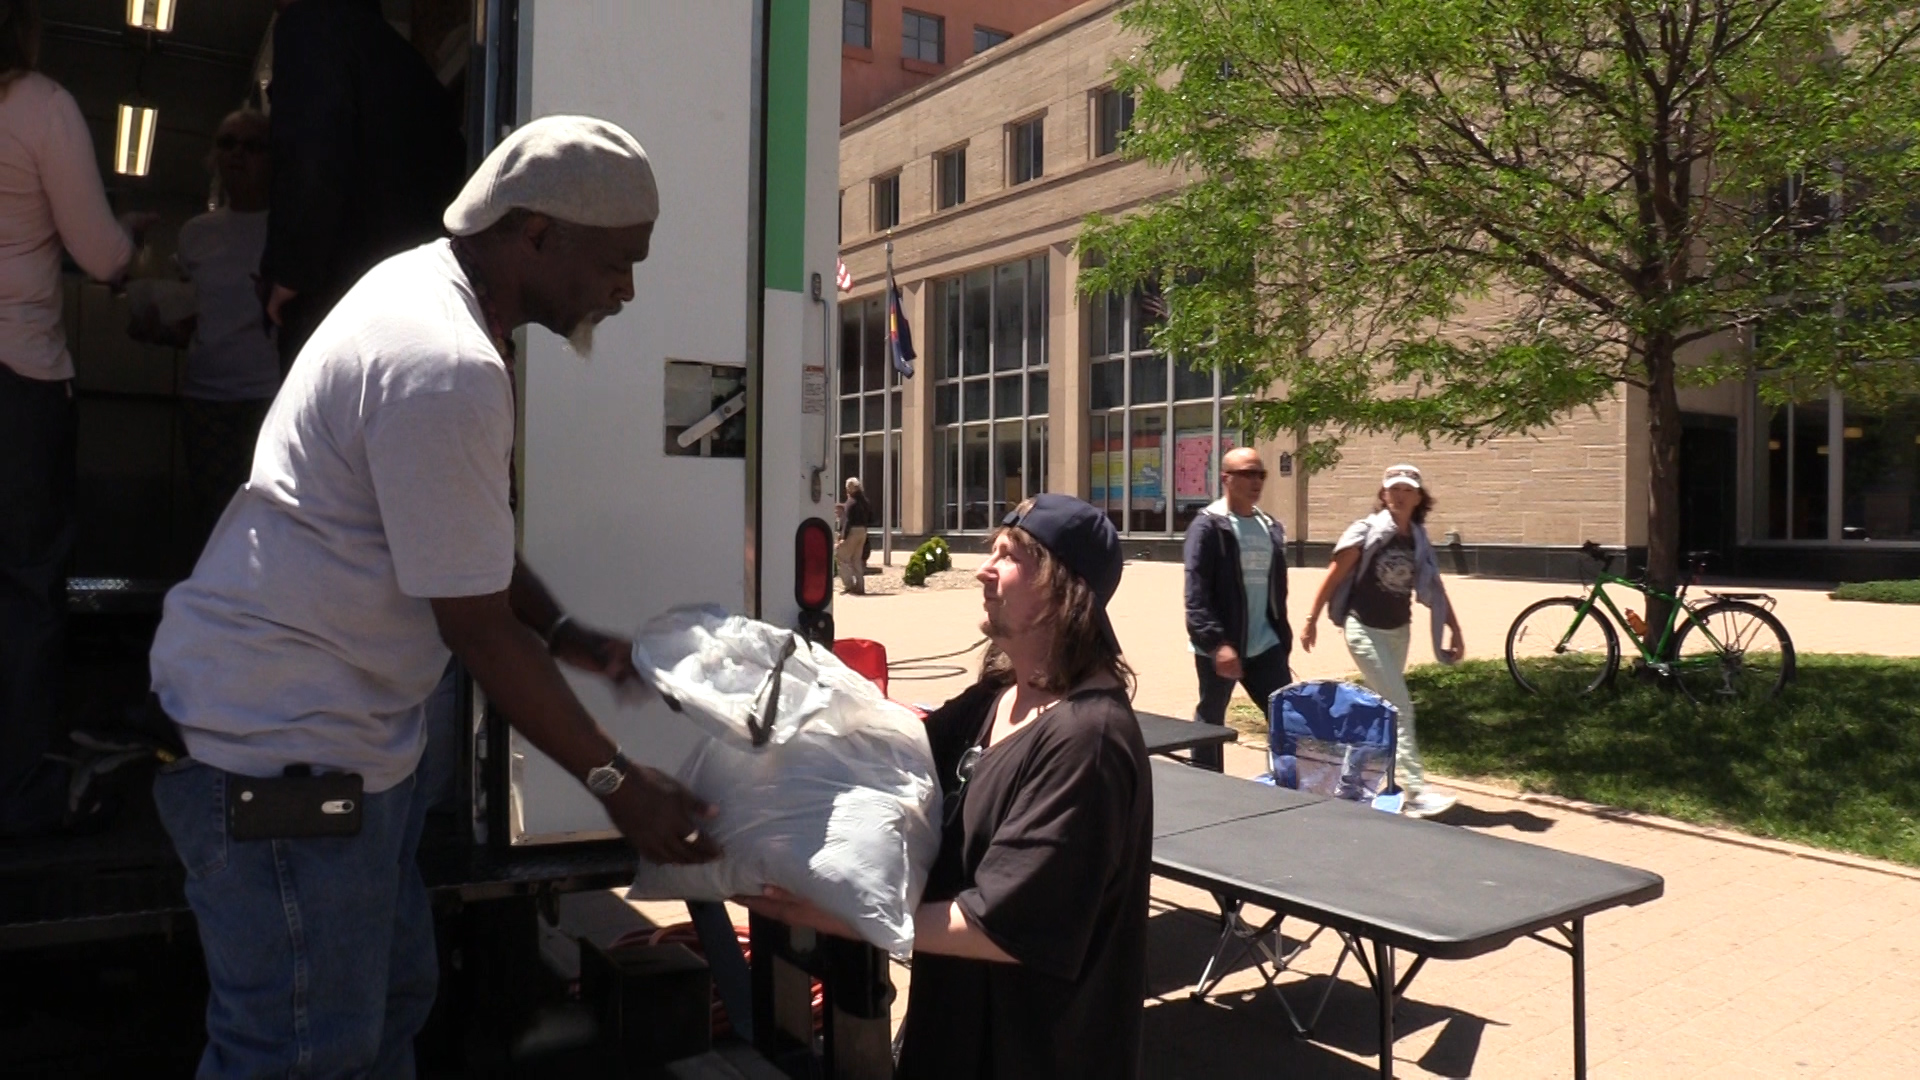 Marcus Harris, Laundry Truck coordinator, delivers a bag of clean clothes at the Denver Public Library downtown.